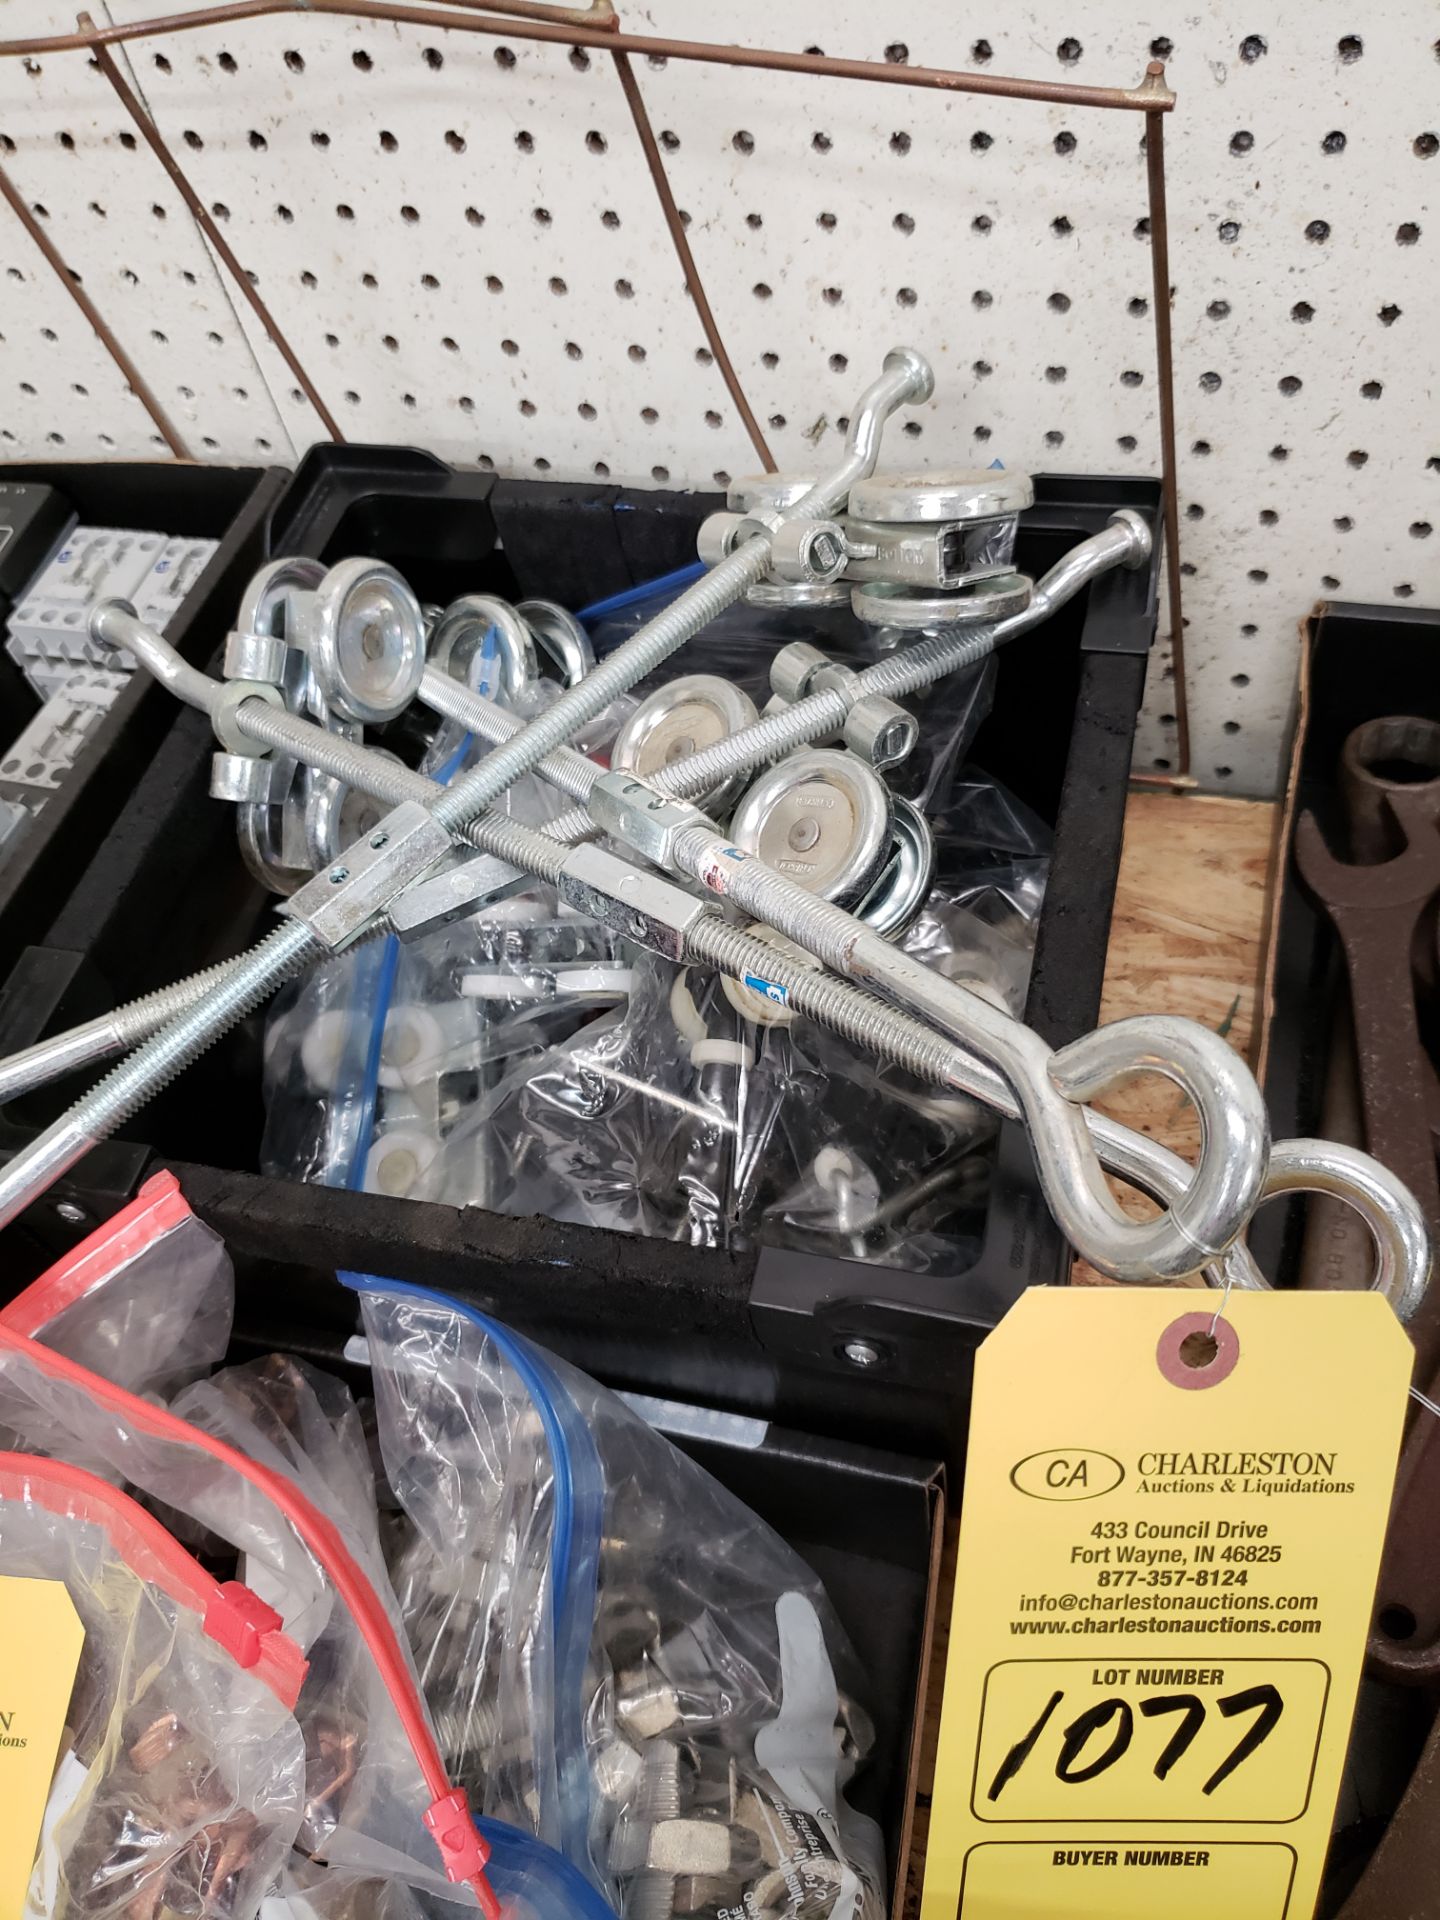 ASSORTED TROLLY HANGERS & LG CABLE WIRE CONNECTORS (LOCATED AT: 432 COUNCIL DRIVE, FORT WAYNE IN